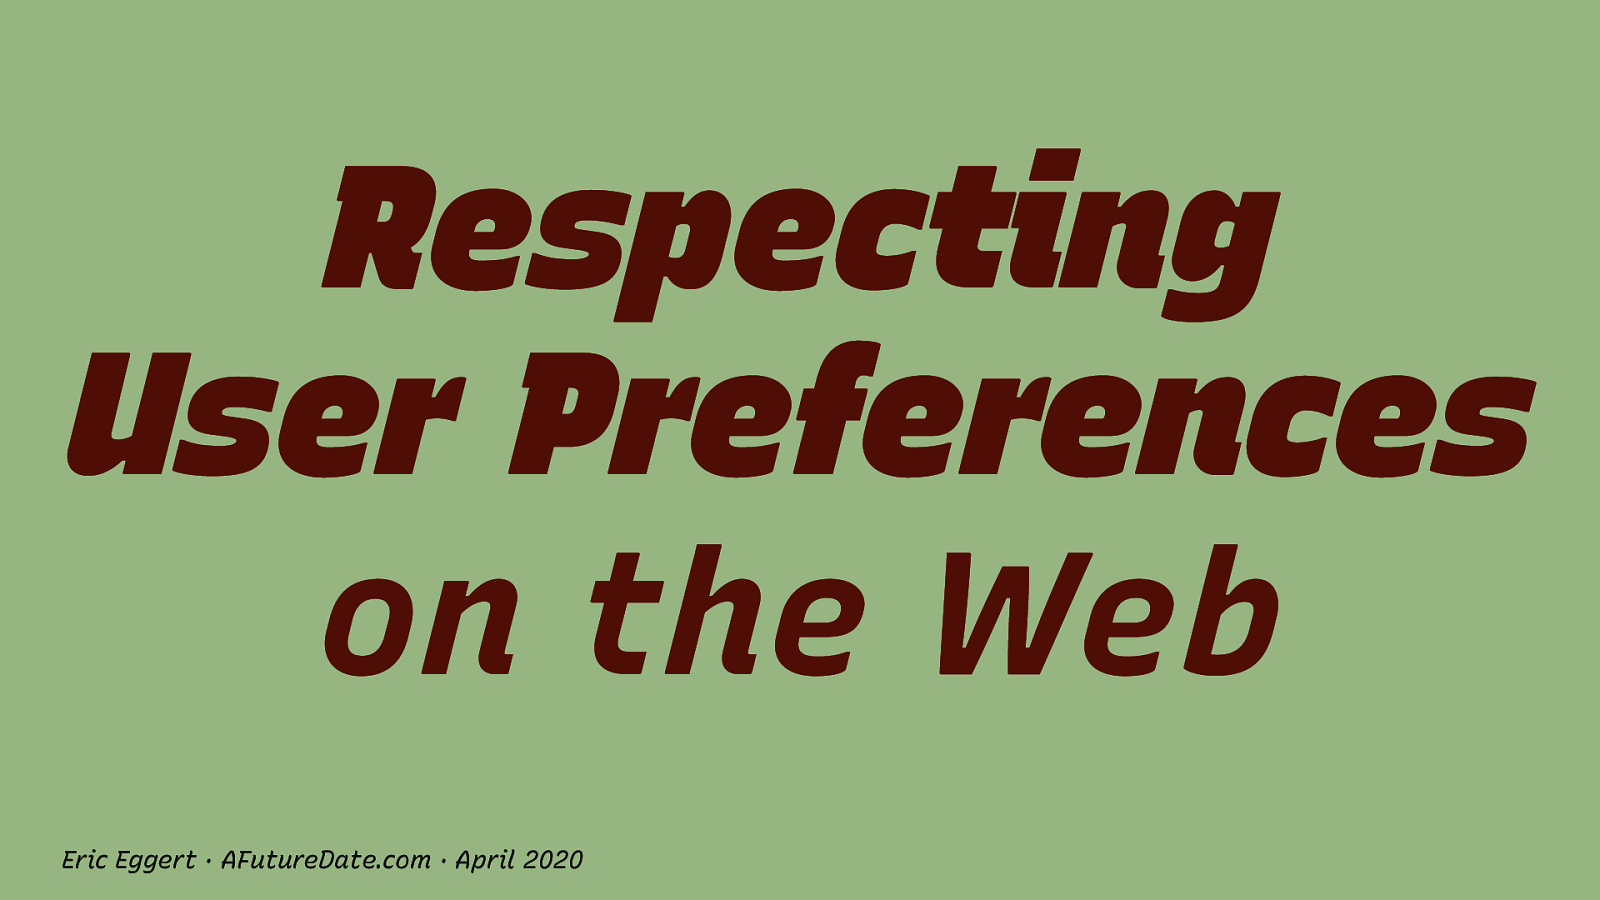 Respecting User Preferences on the Web